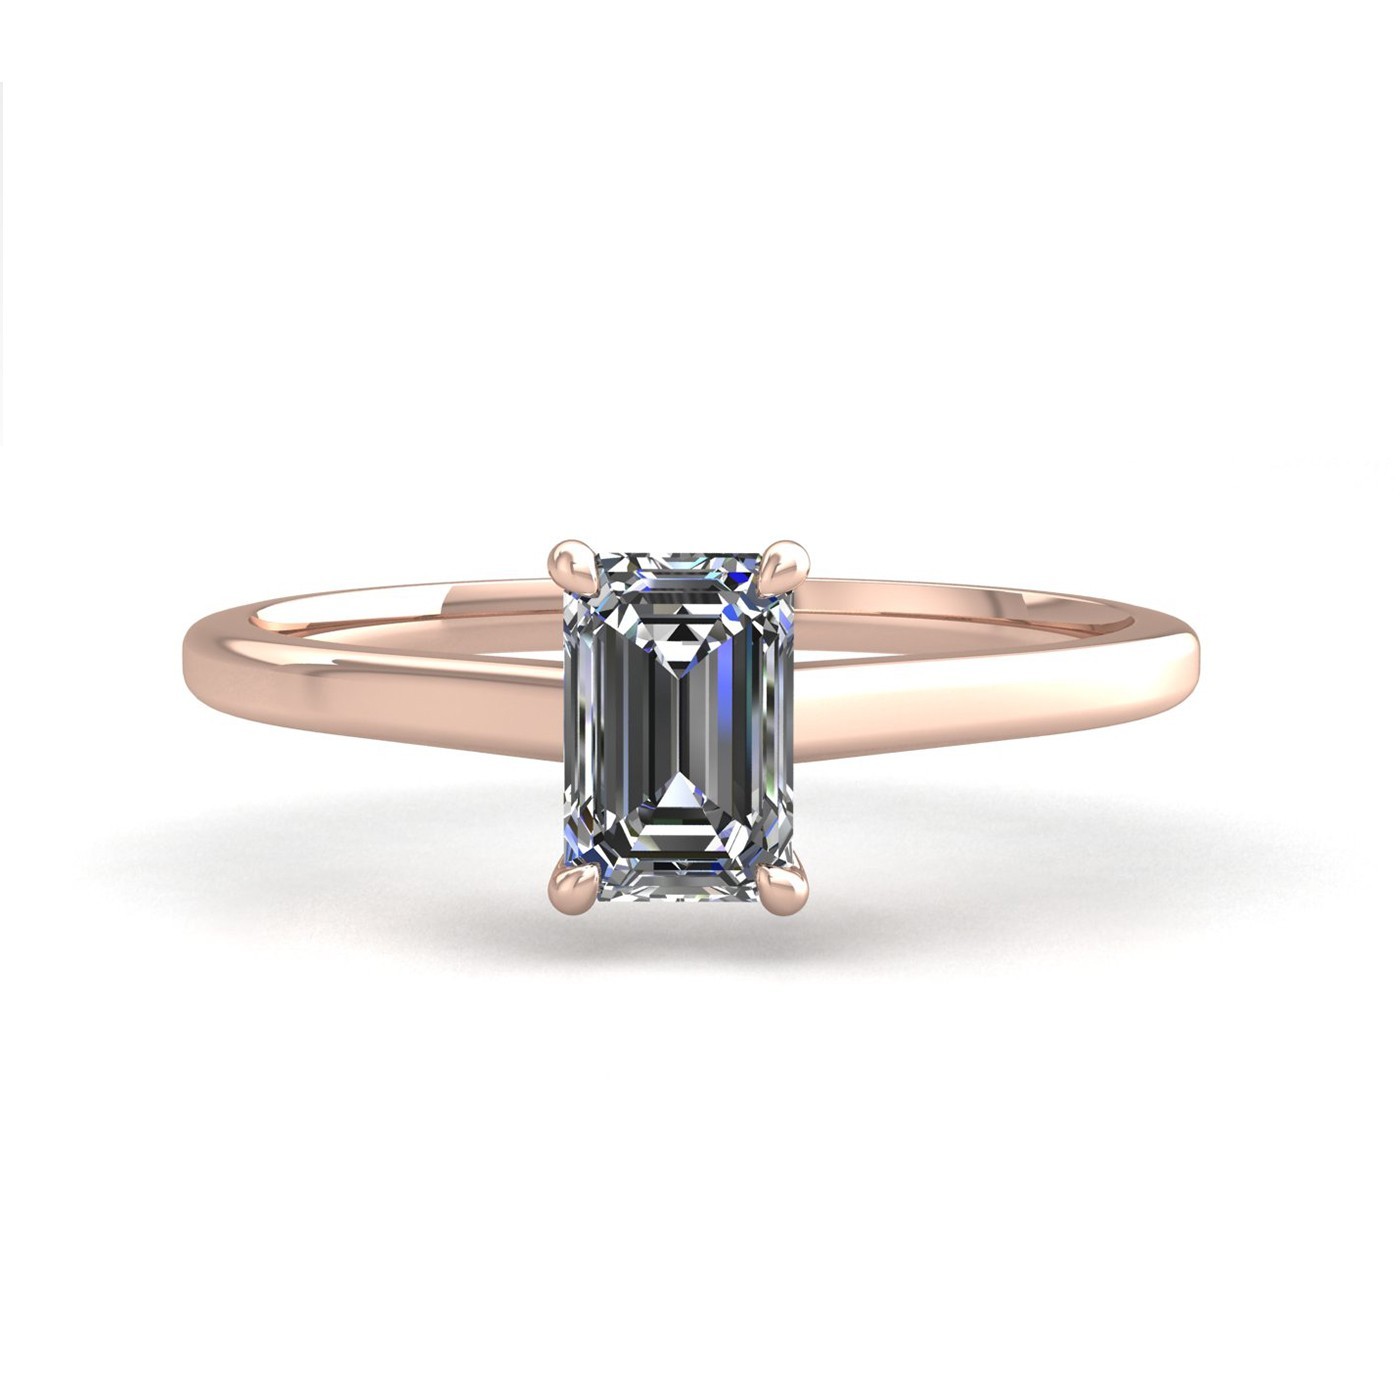 18k rose gold  0,50 ct 4 prongs solitaire emerald cut diamond engagement ring with whisper thin band